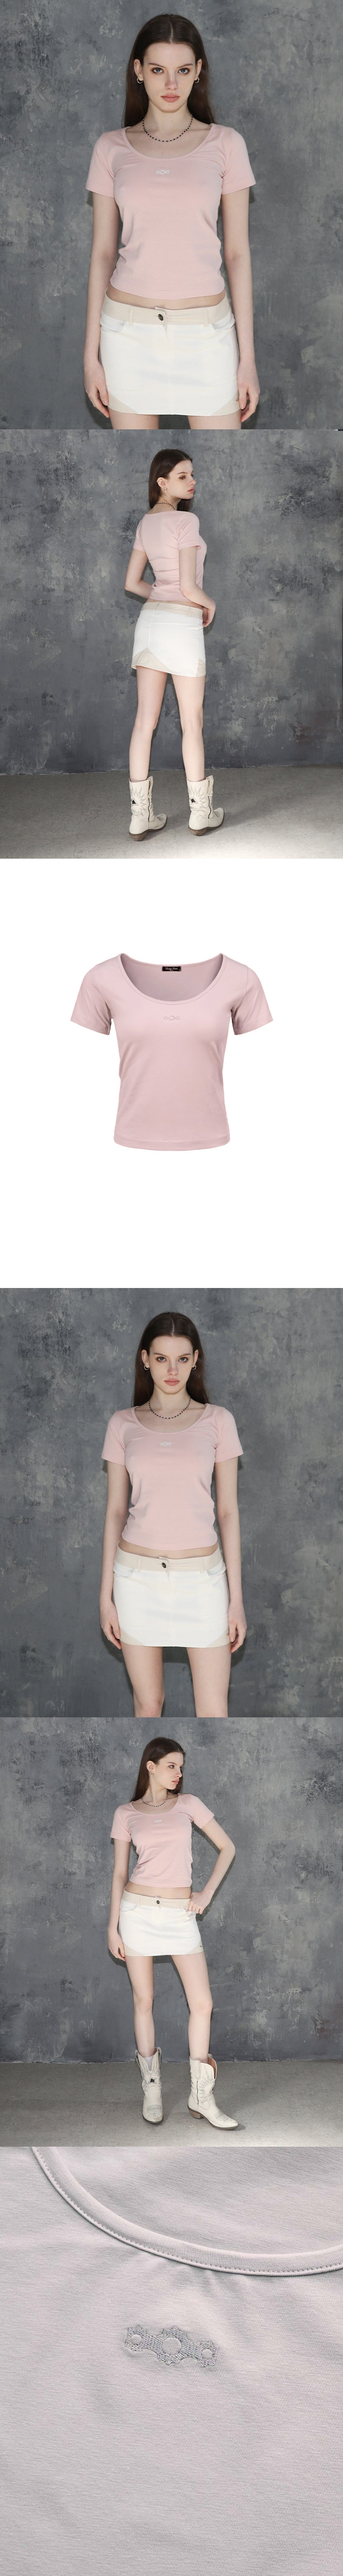 Triclipse embroidered U-neck T-shirt pale pink